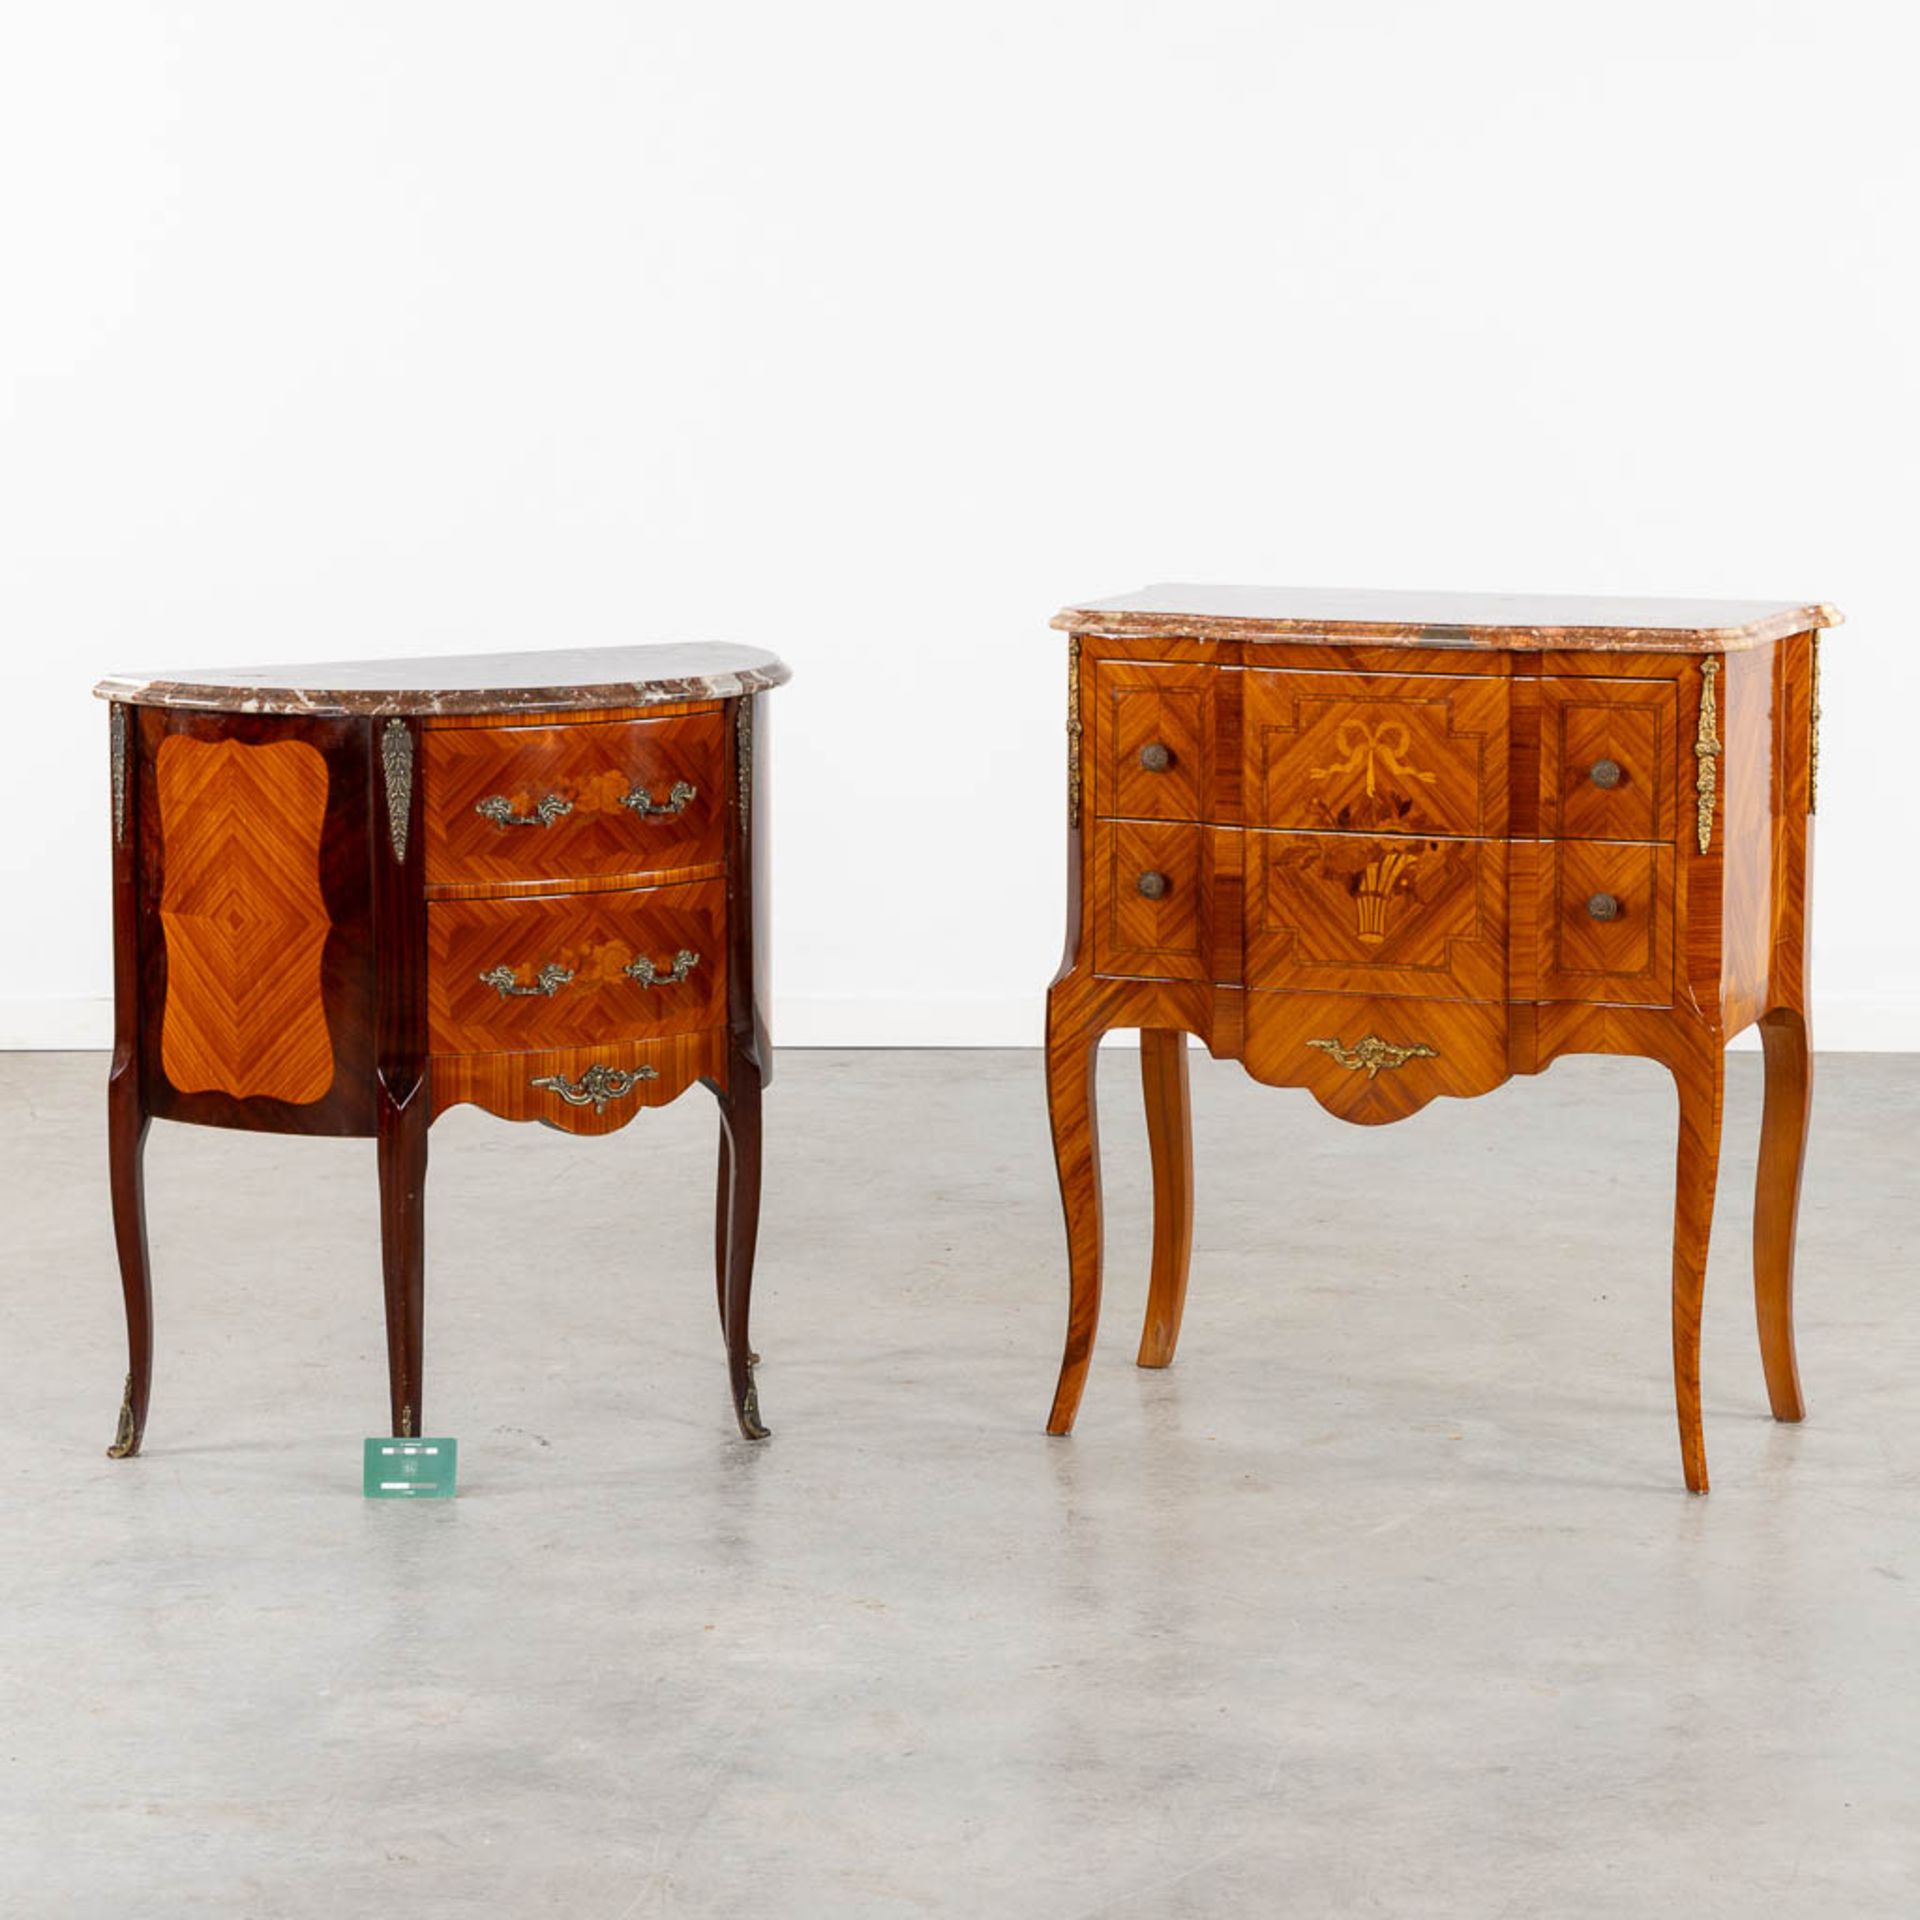 Two small cabinets with drawers, marquetry inlay and a marble top. 20th C. (L:39 x W:70 x H:80 cm) - Bild 2 aus 11